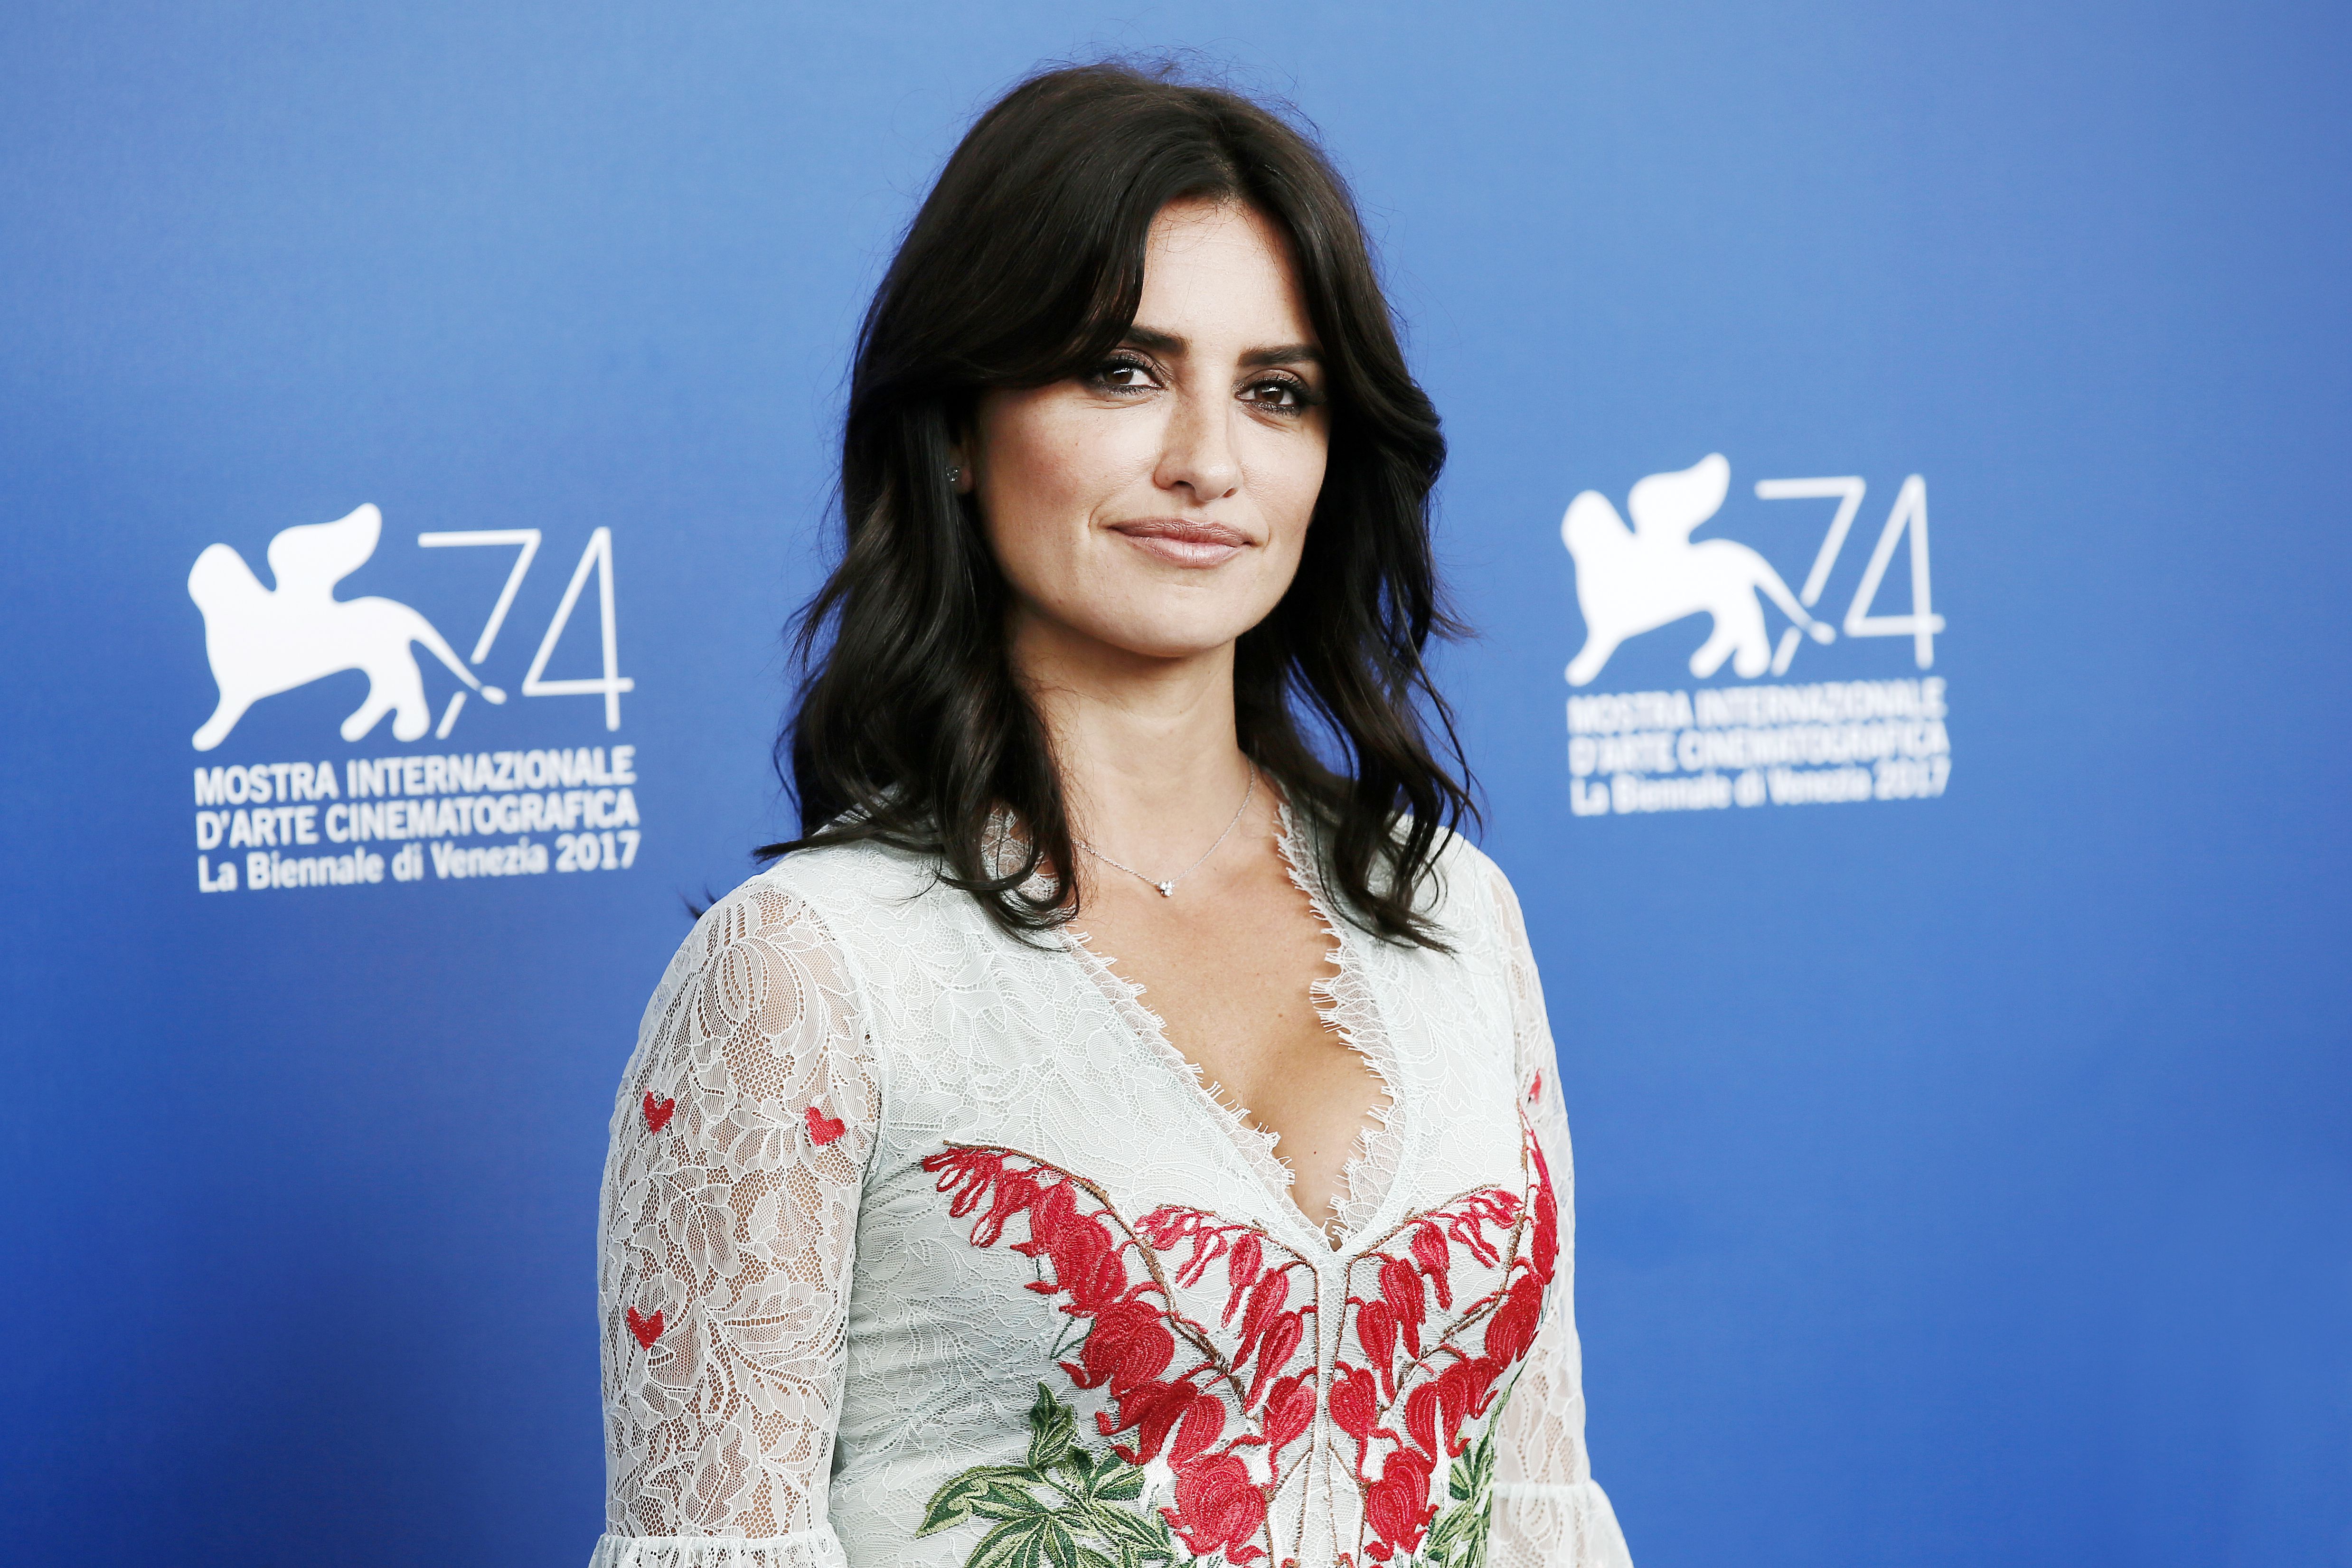 Penelope Cruz wears a white lace top with red and green appliqués.